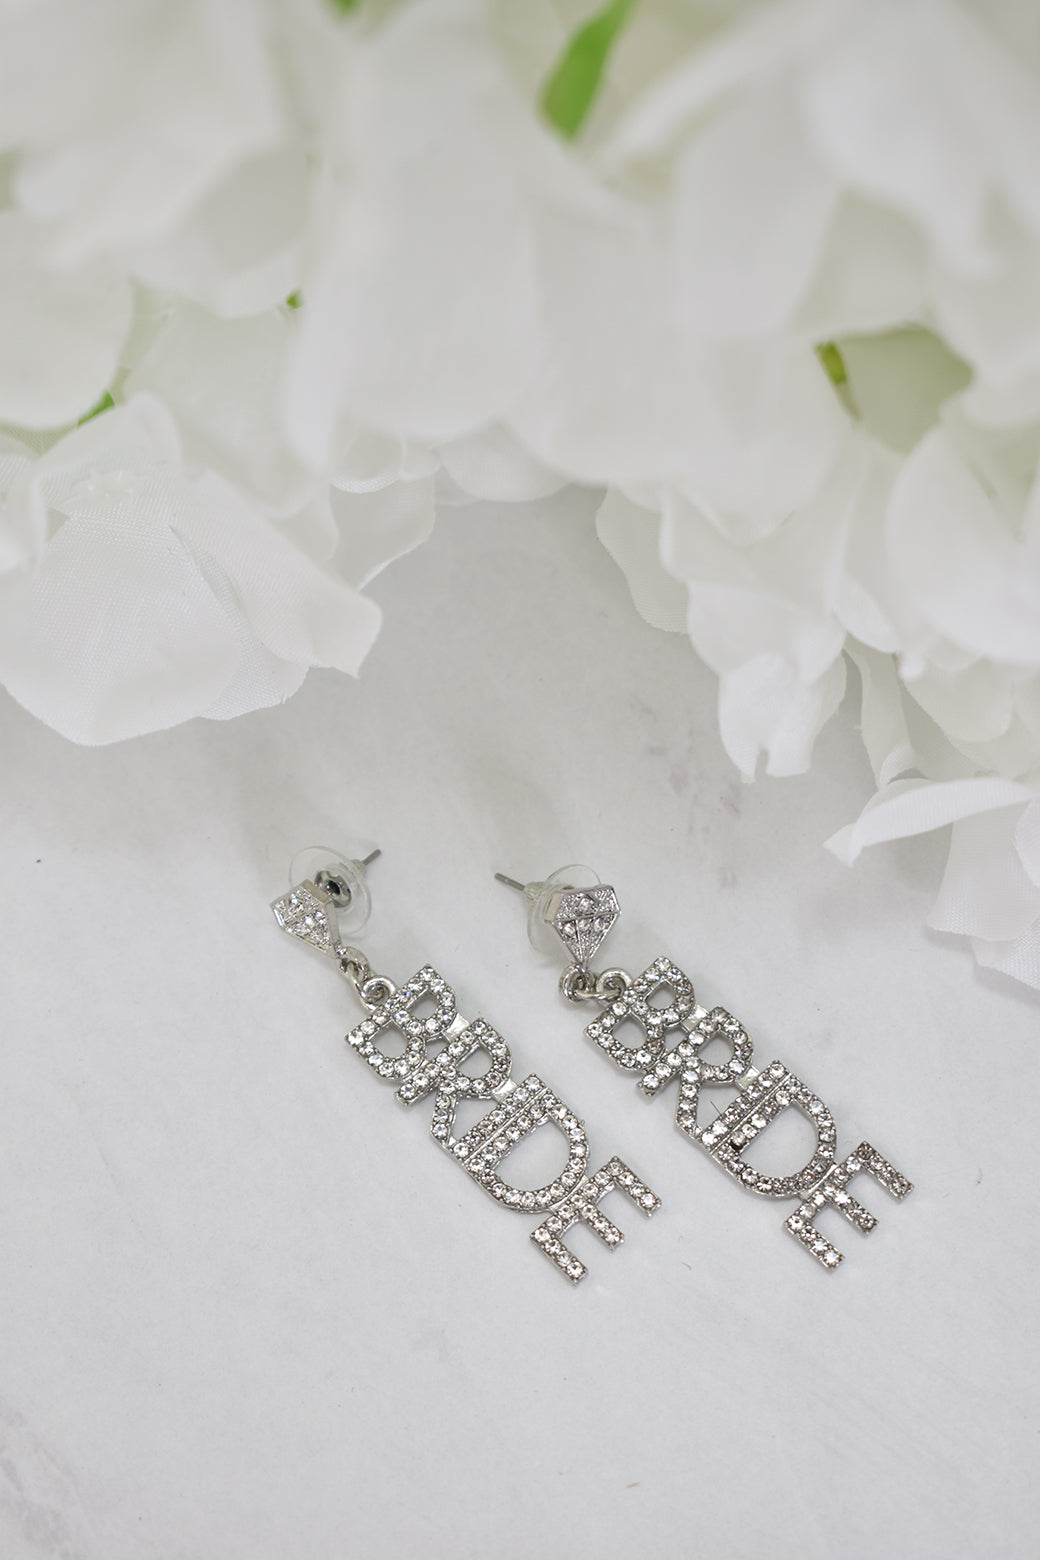 All Rise For The Bride Earrings